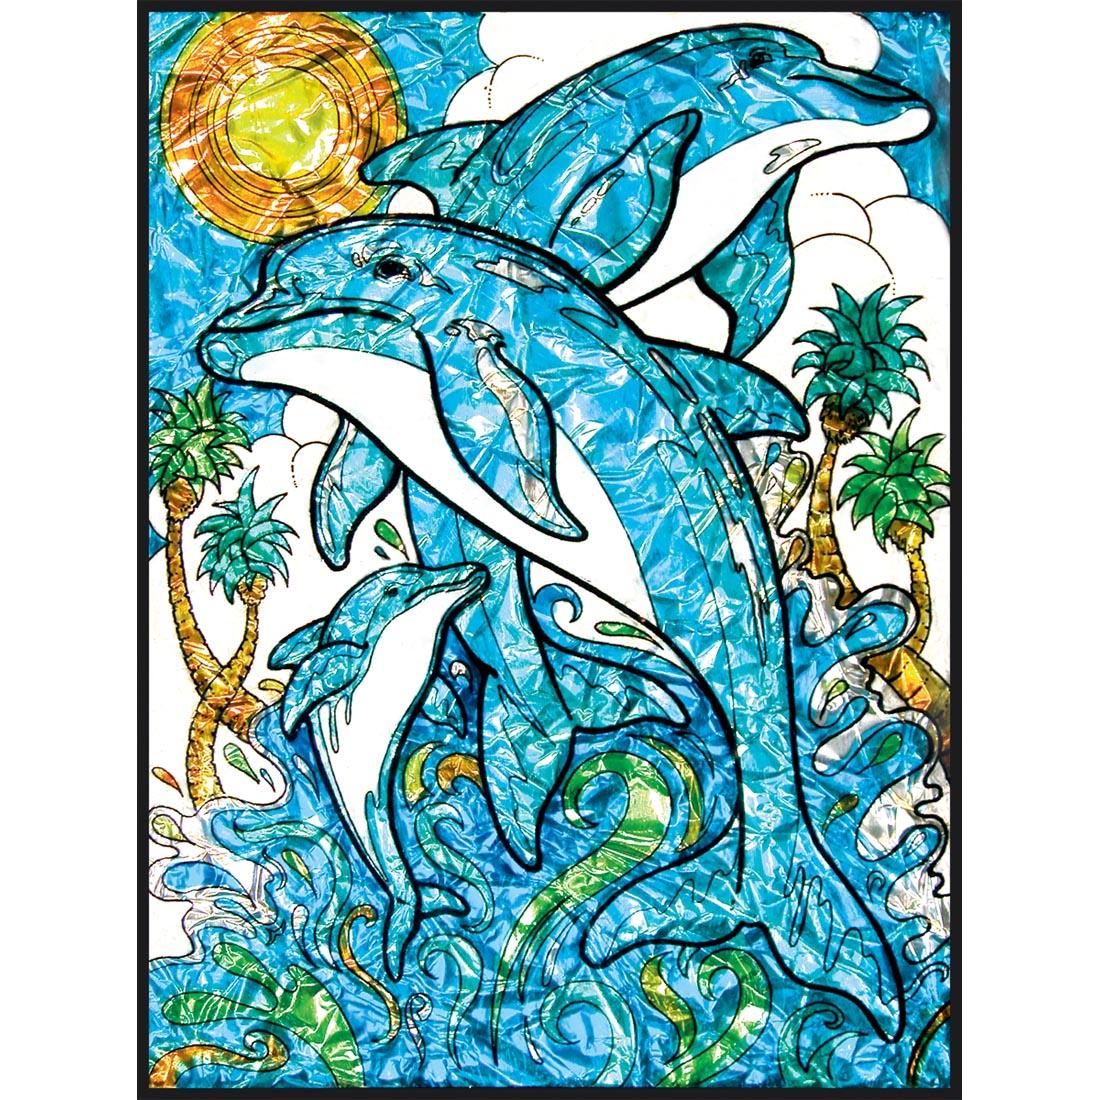 Completed painting from the Dolphins Foil Painting By Numbers